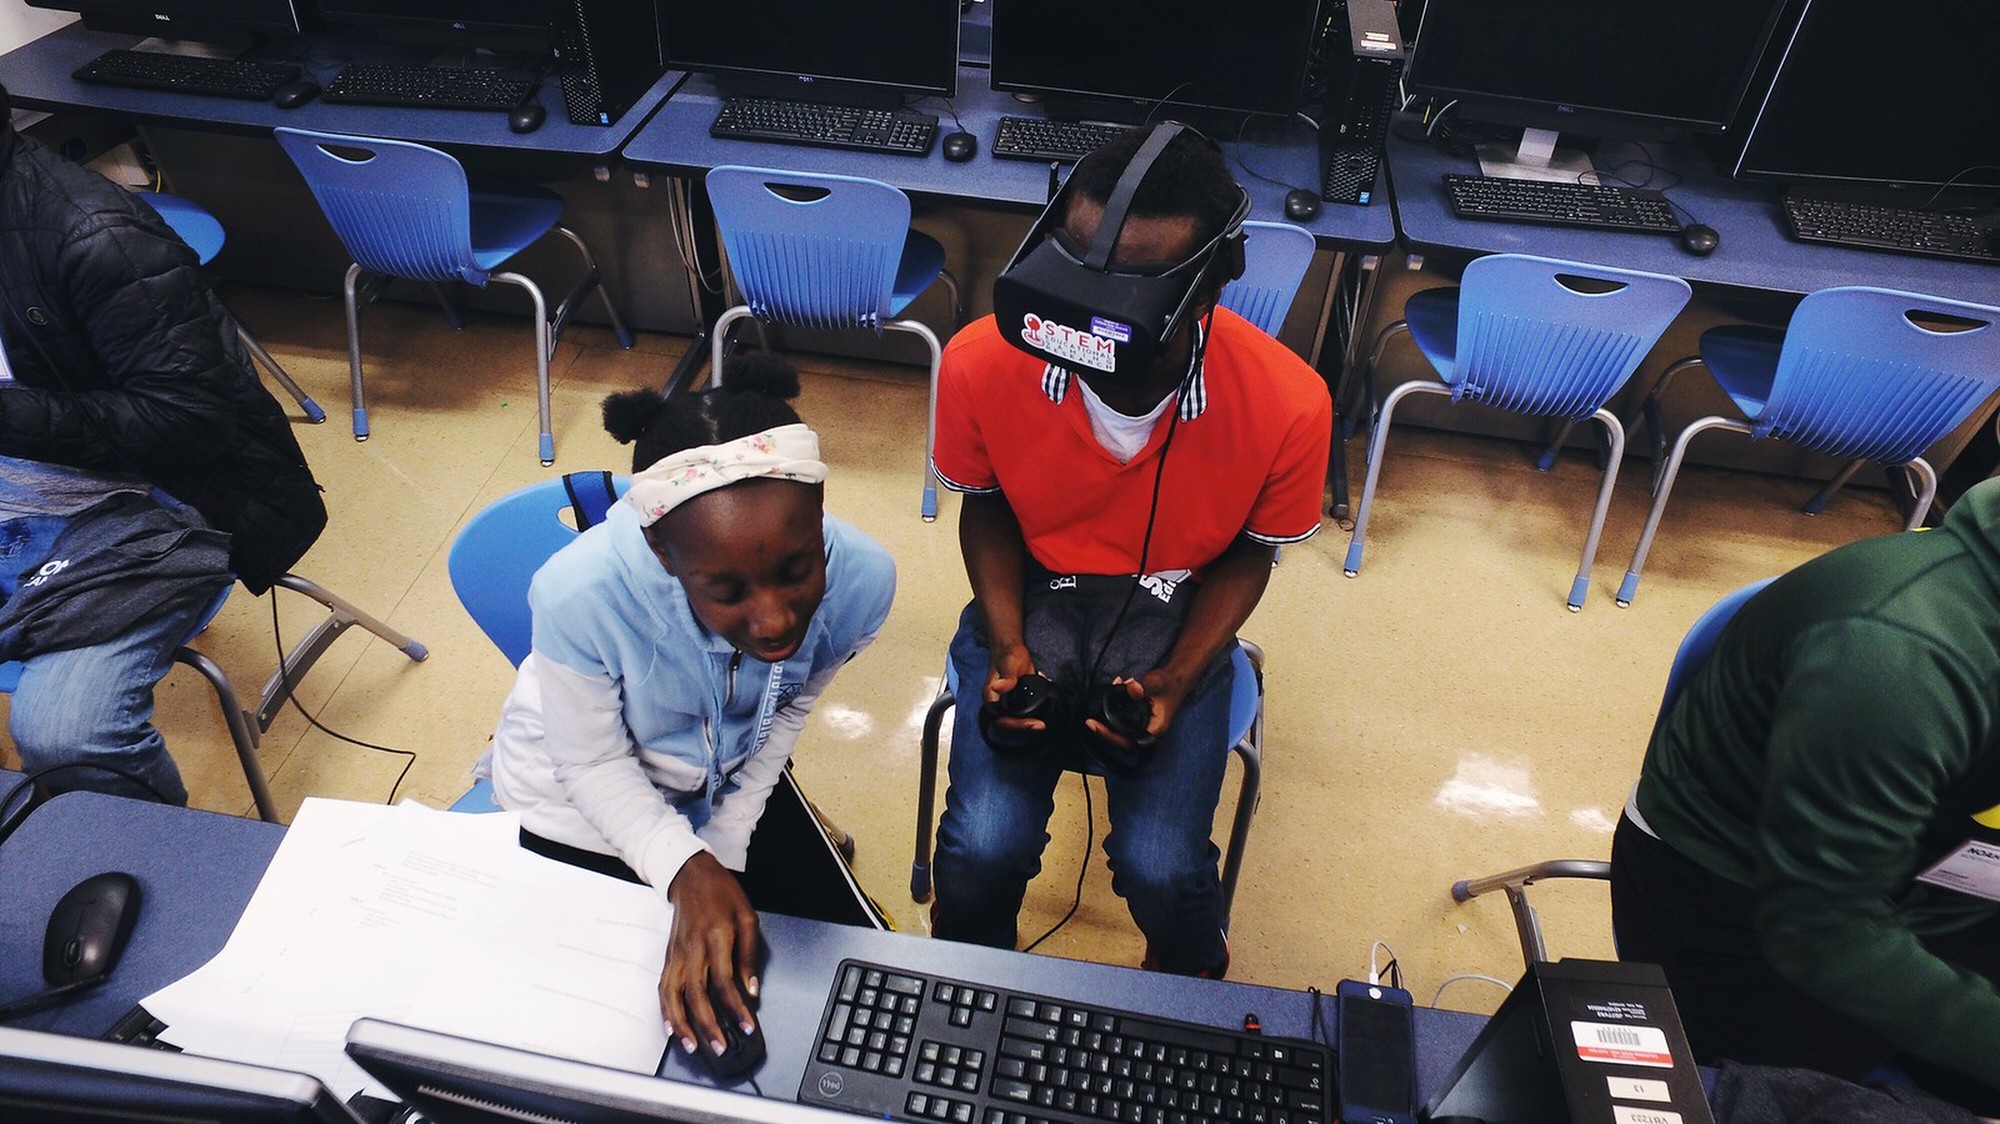 Students participating in CSUEB's virtual reality camp